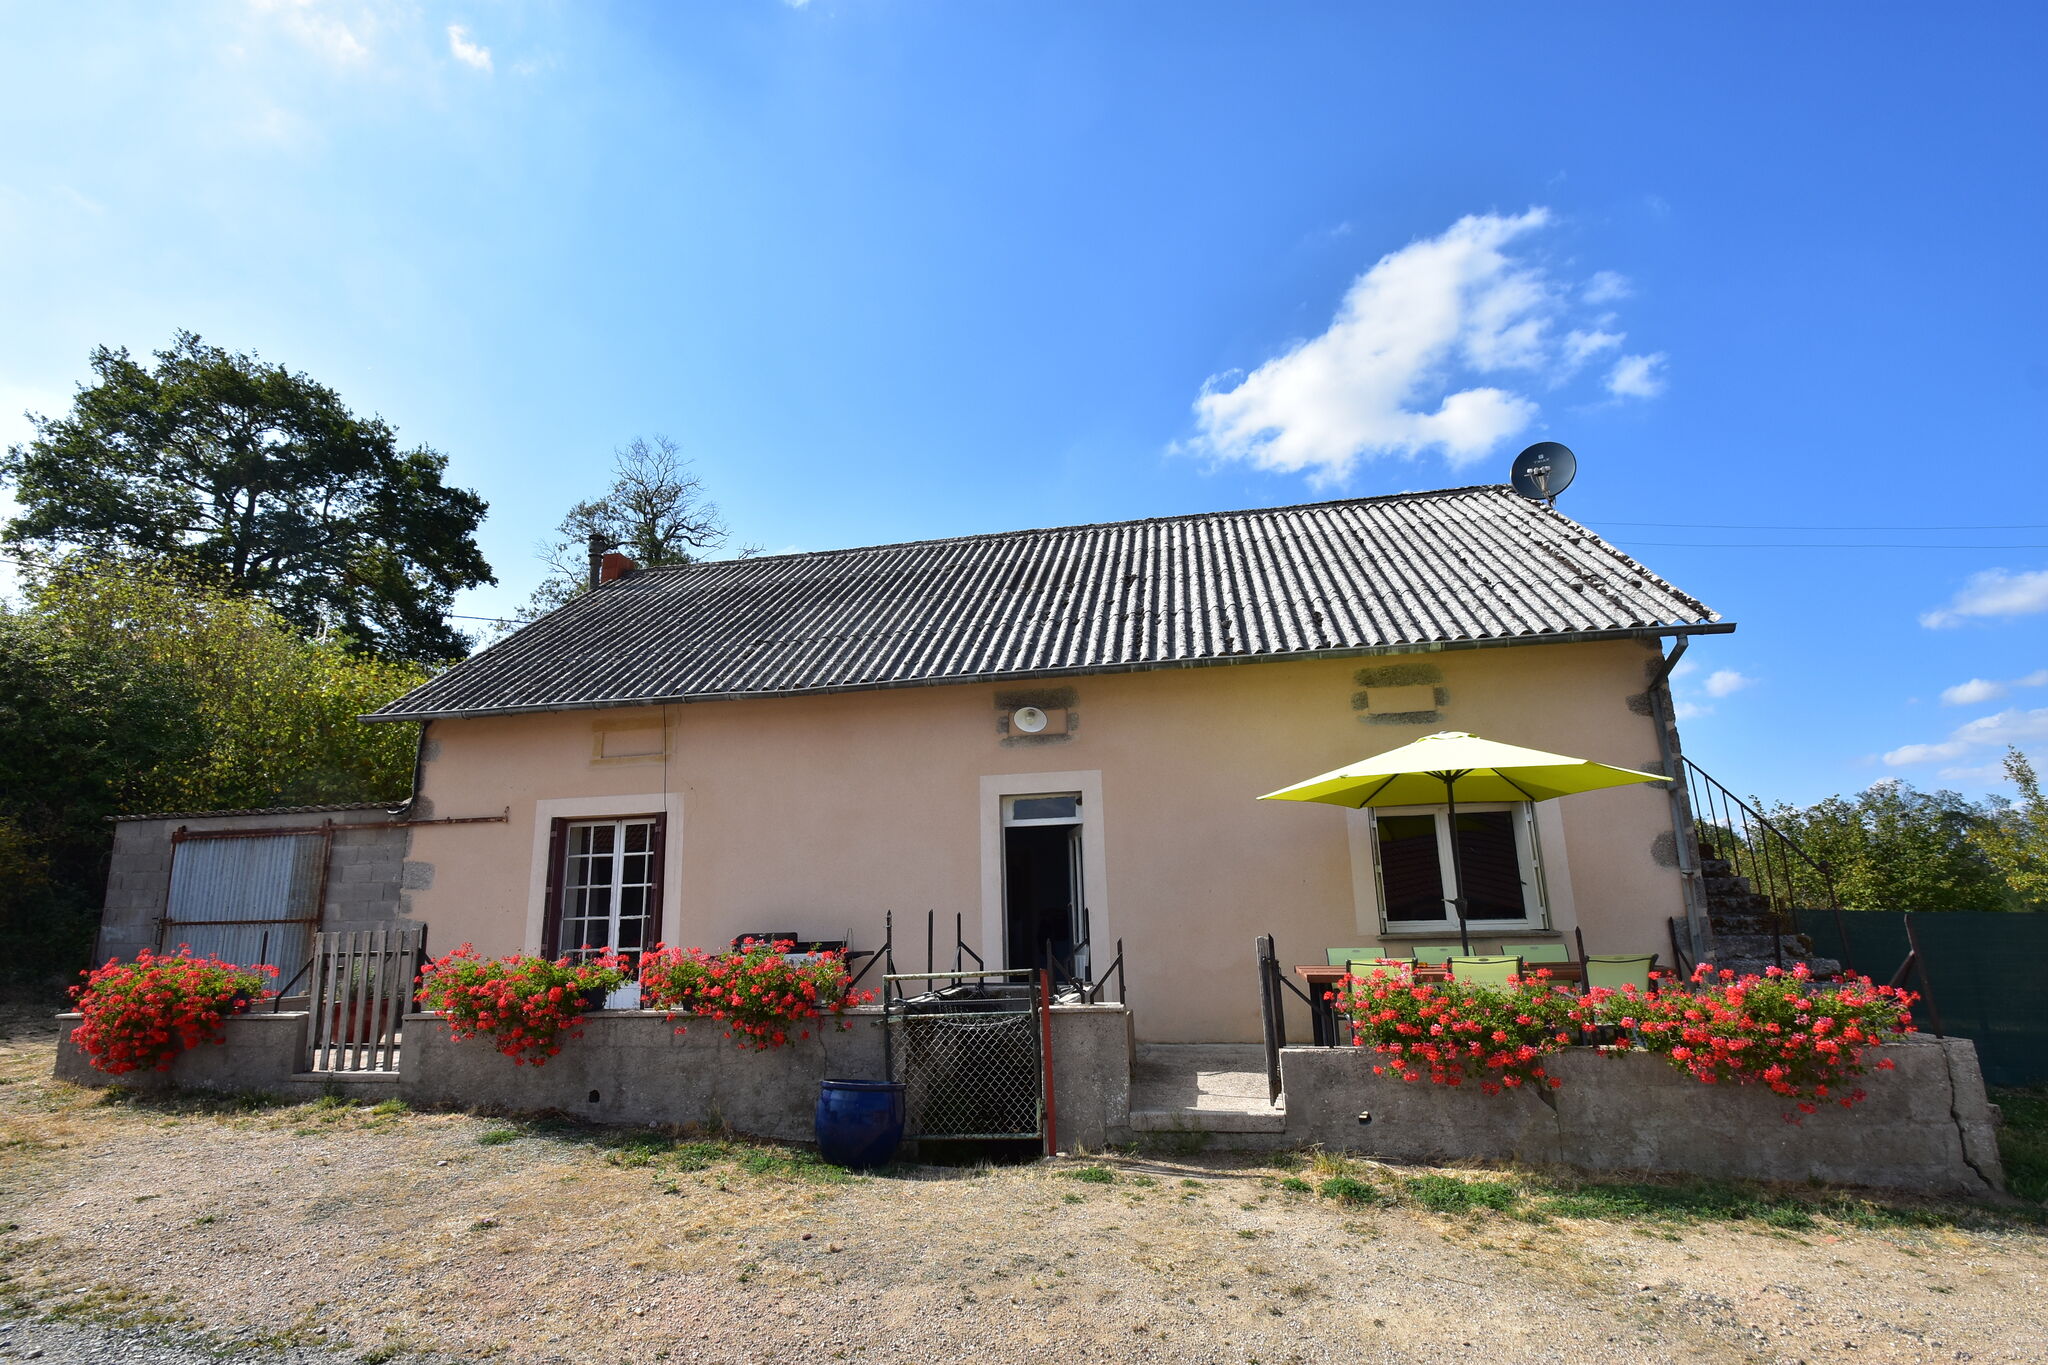 Enjoy the peace and nature in this gite with a pleasant garden and great views